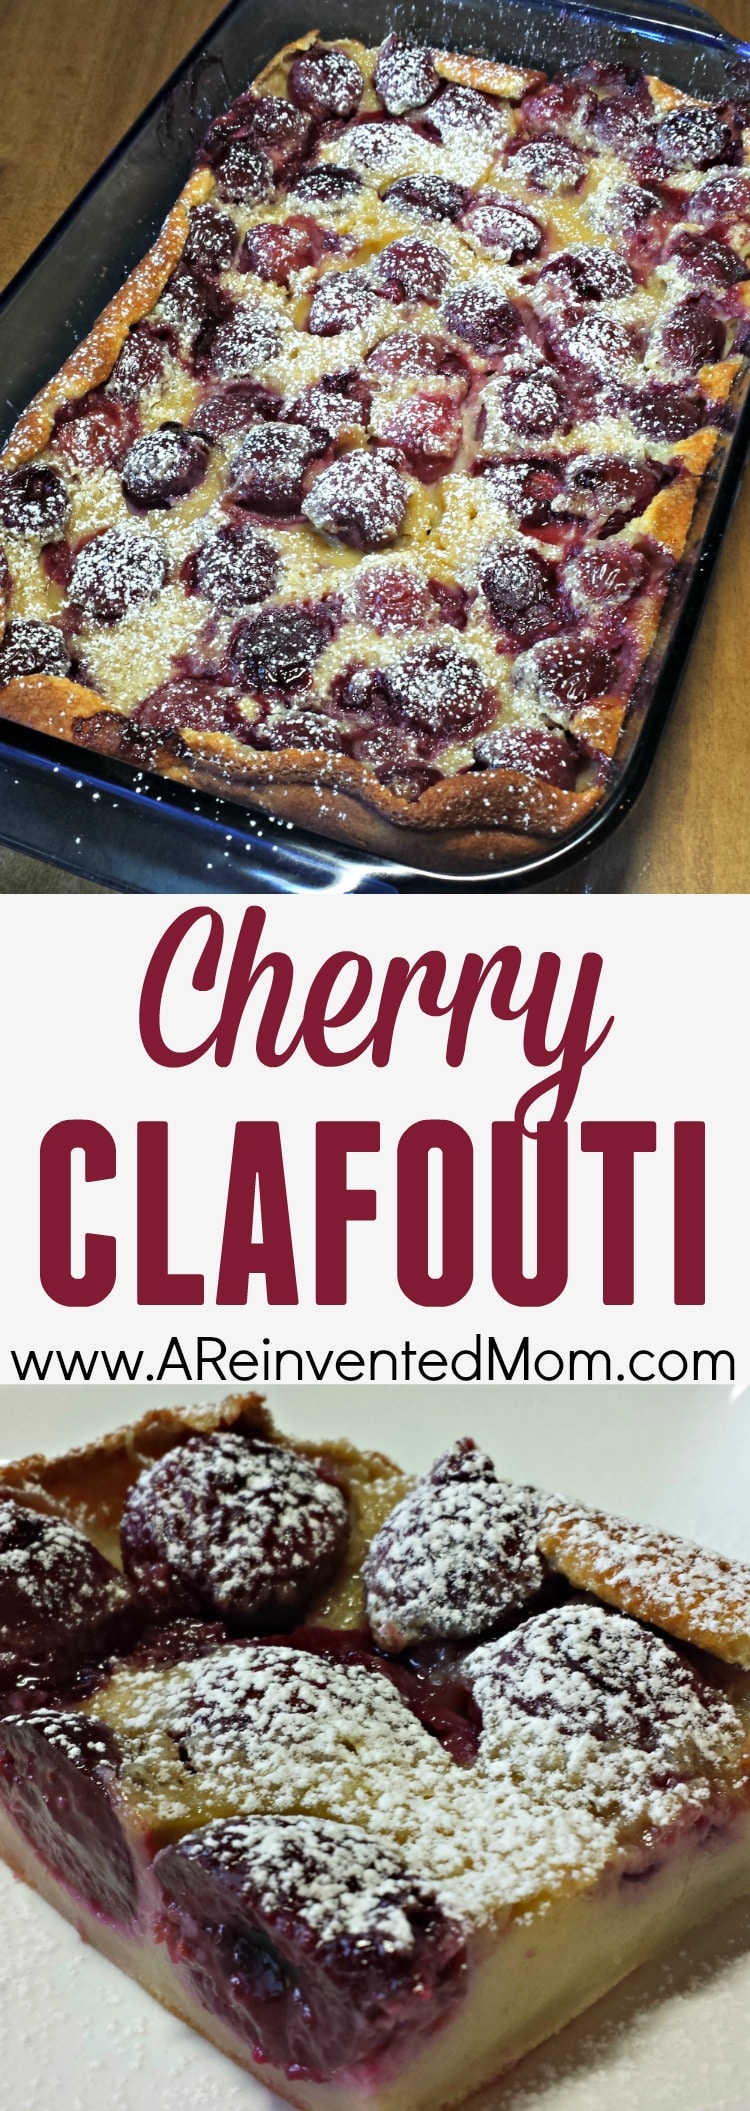 Packed with juicy cherries and a hint of almond, Cherry Clafouti is one of the first dishes I make when cherry season rolls around. Cherry Clafouti | A Reinvented Mom